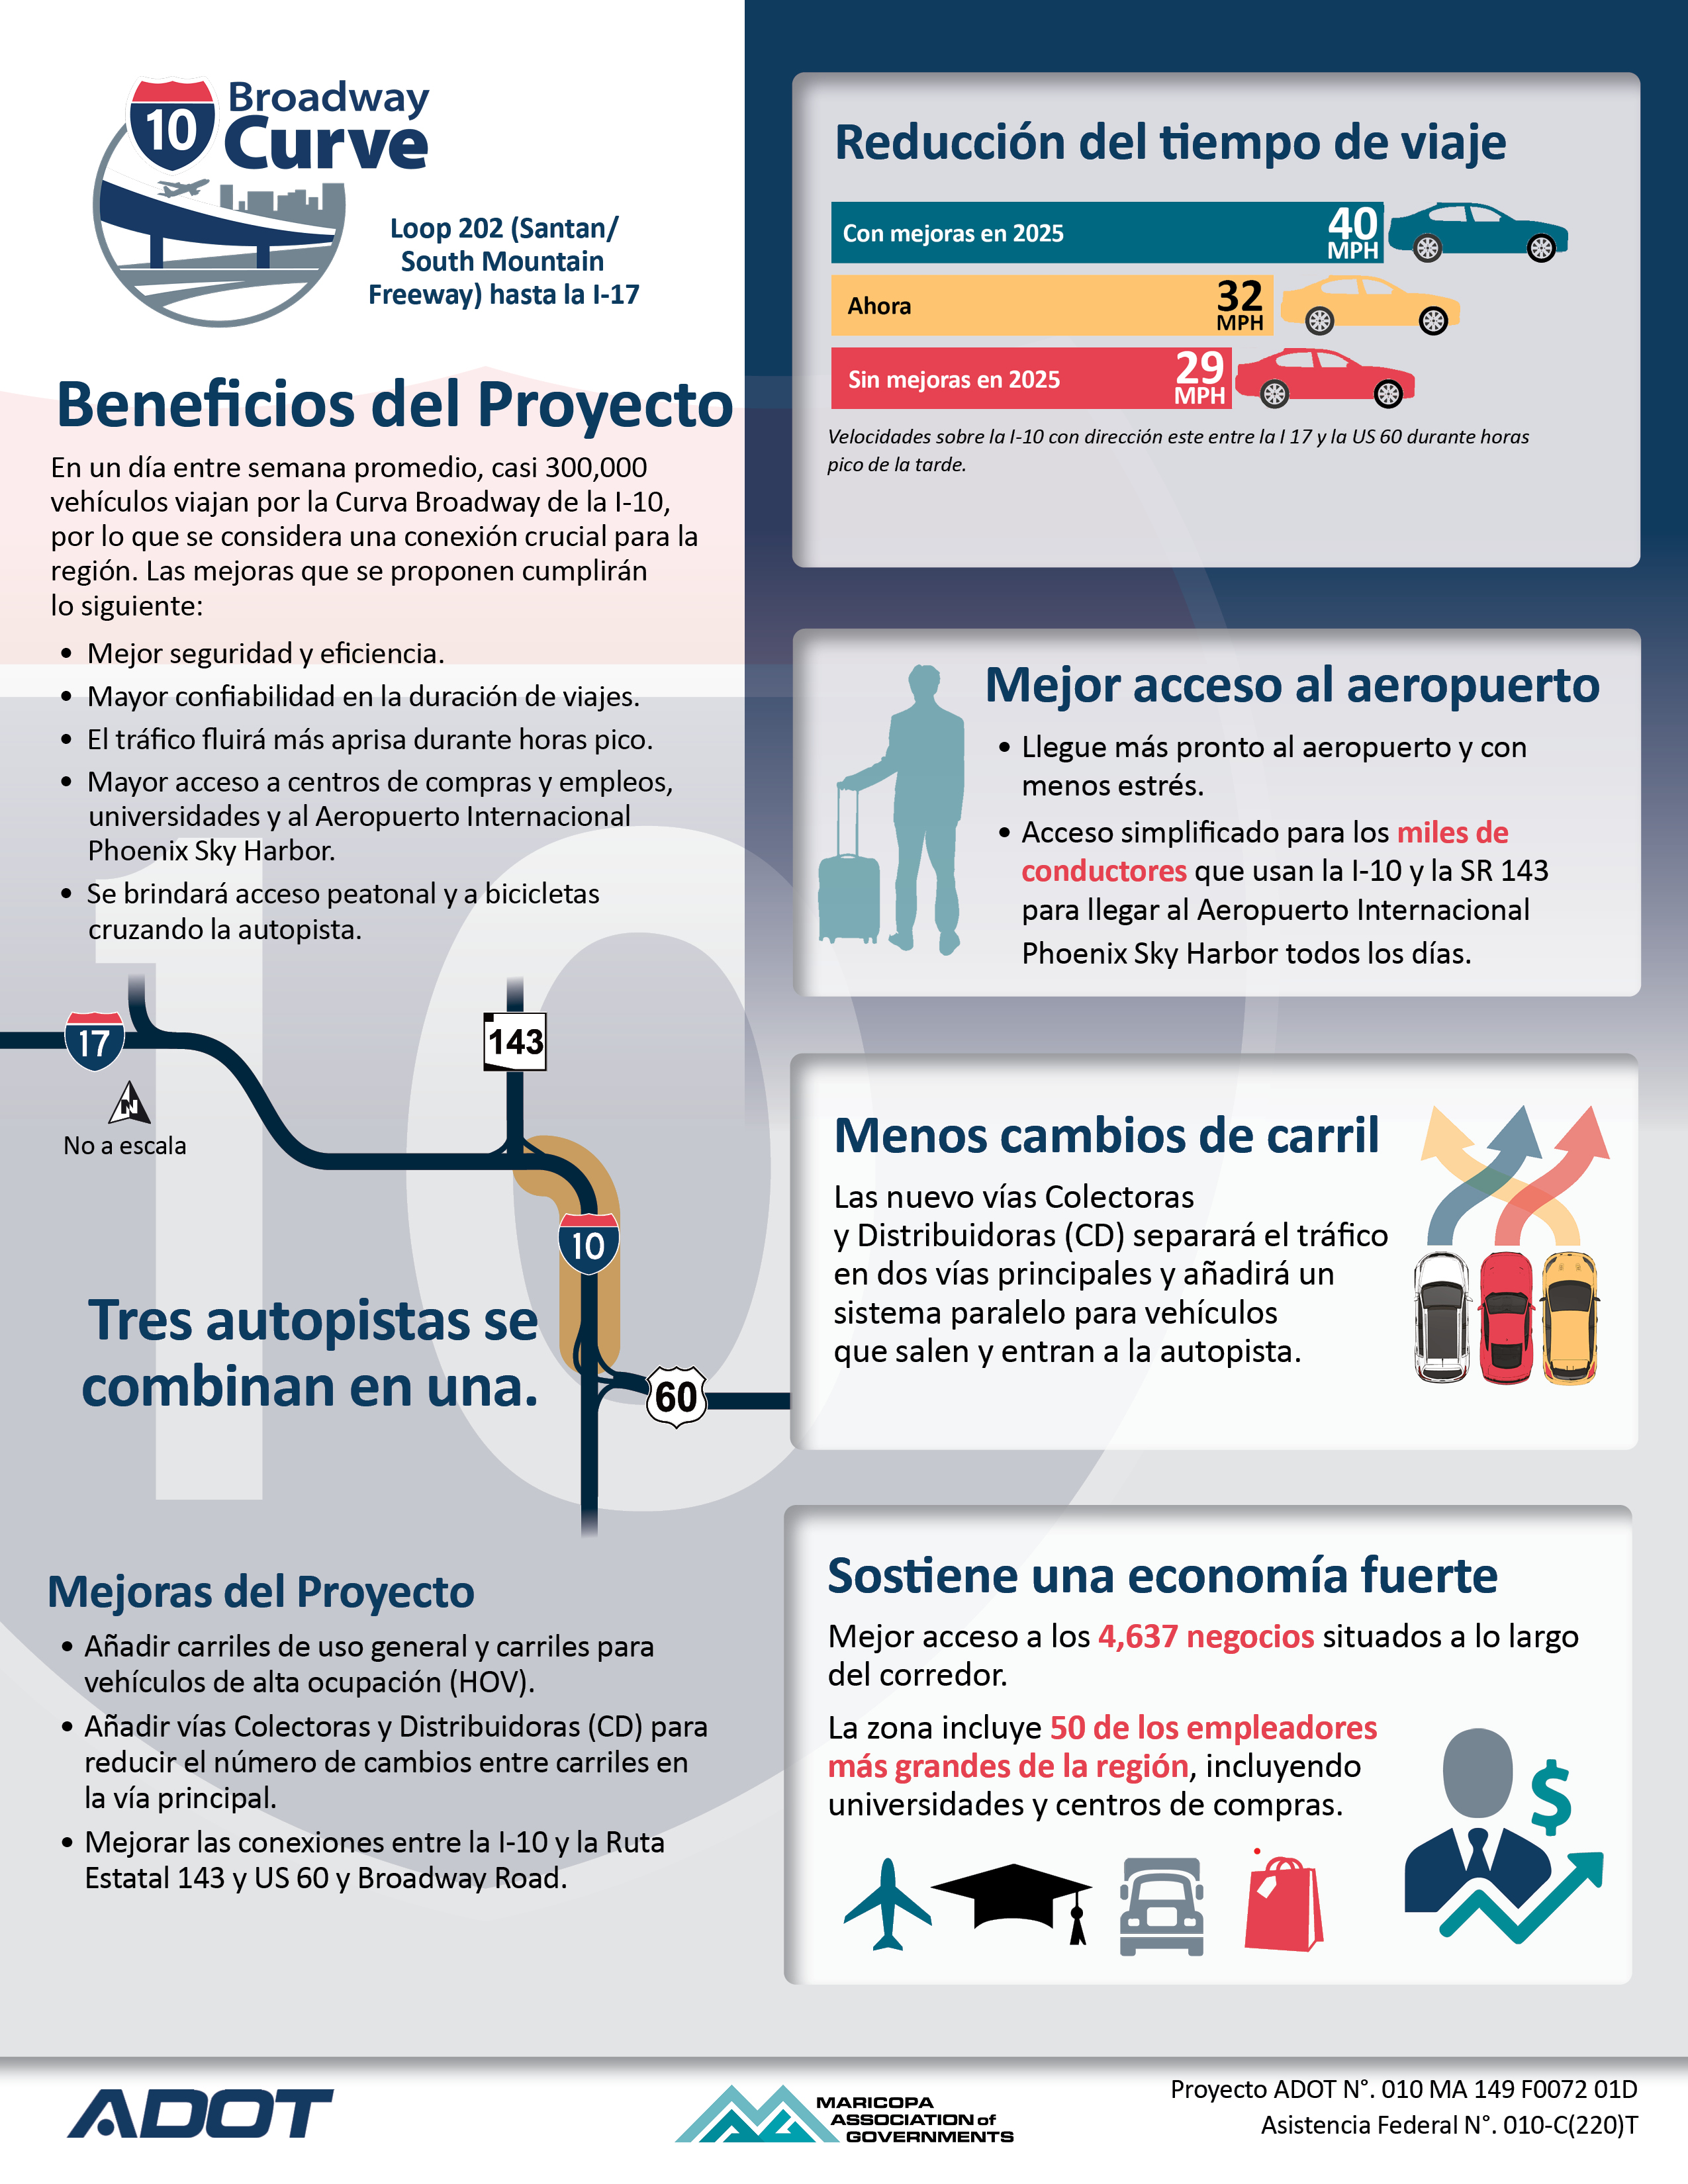 Spanish version of the I-10 Broadway Curve Project Benefits Flyer